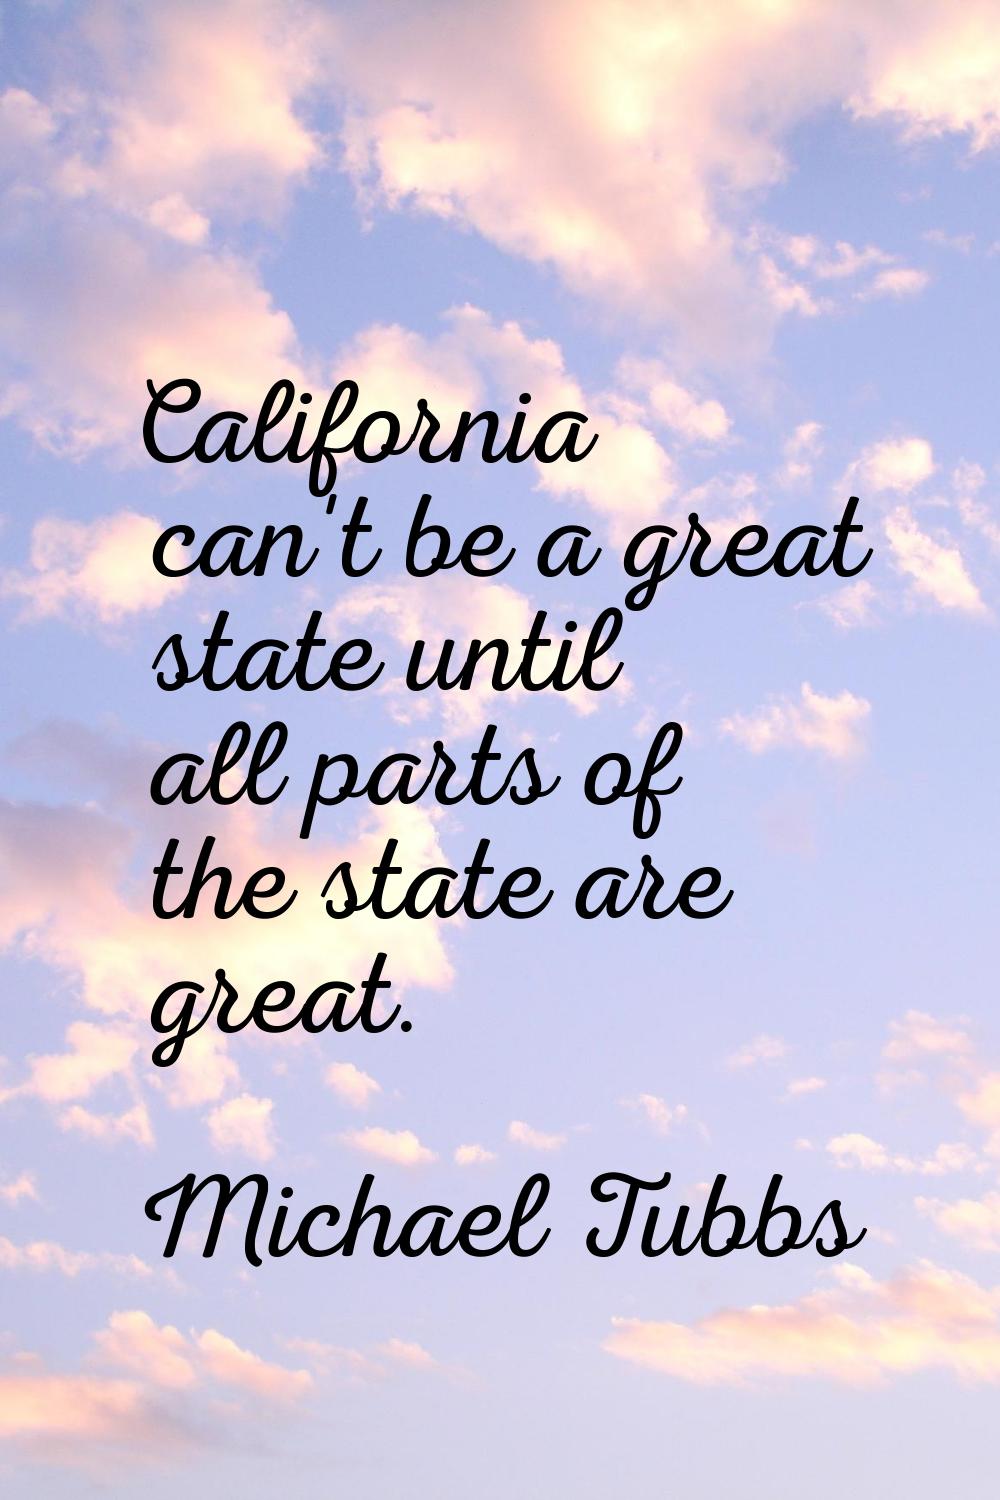 California can't be a great state until all parts of the state are great.